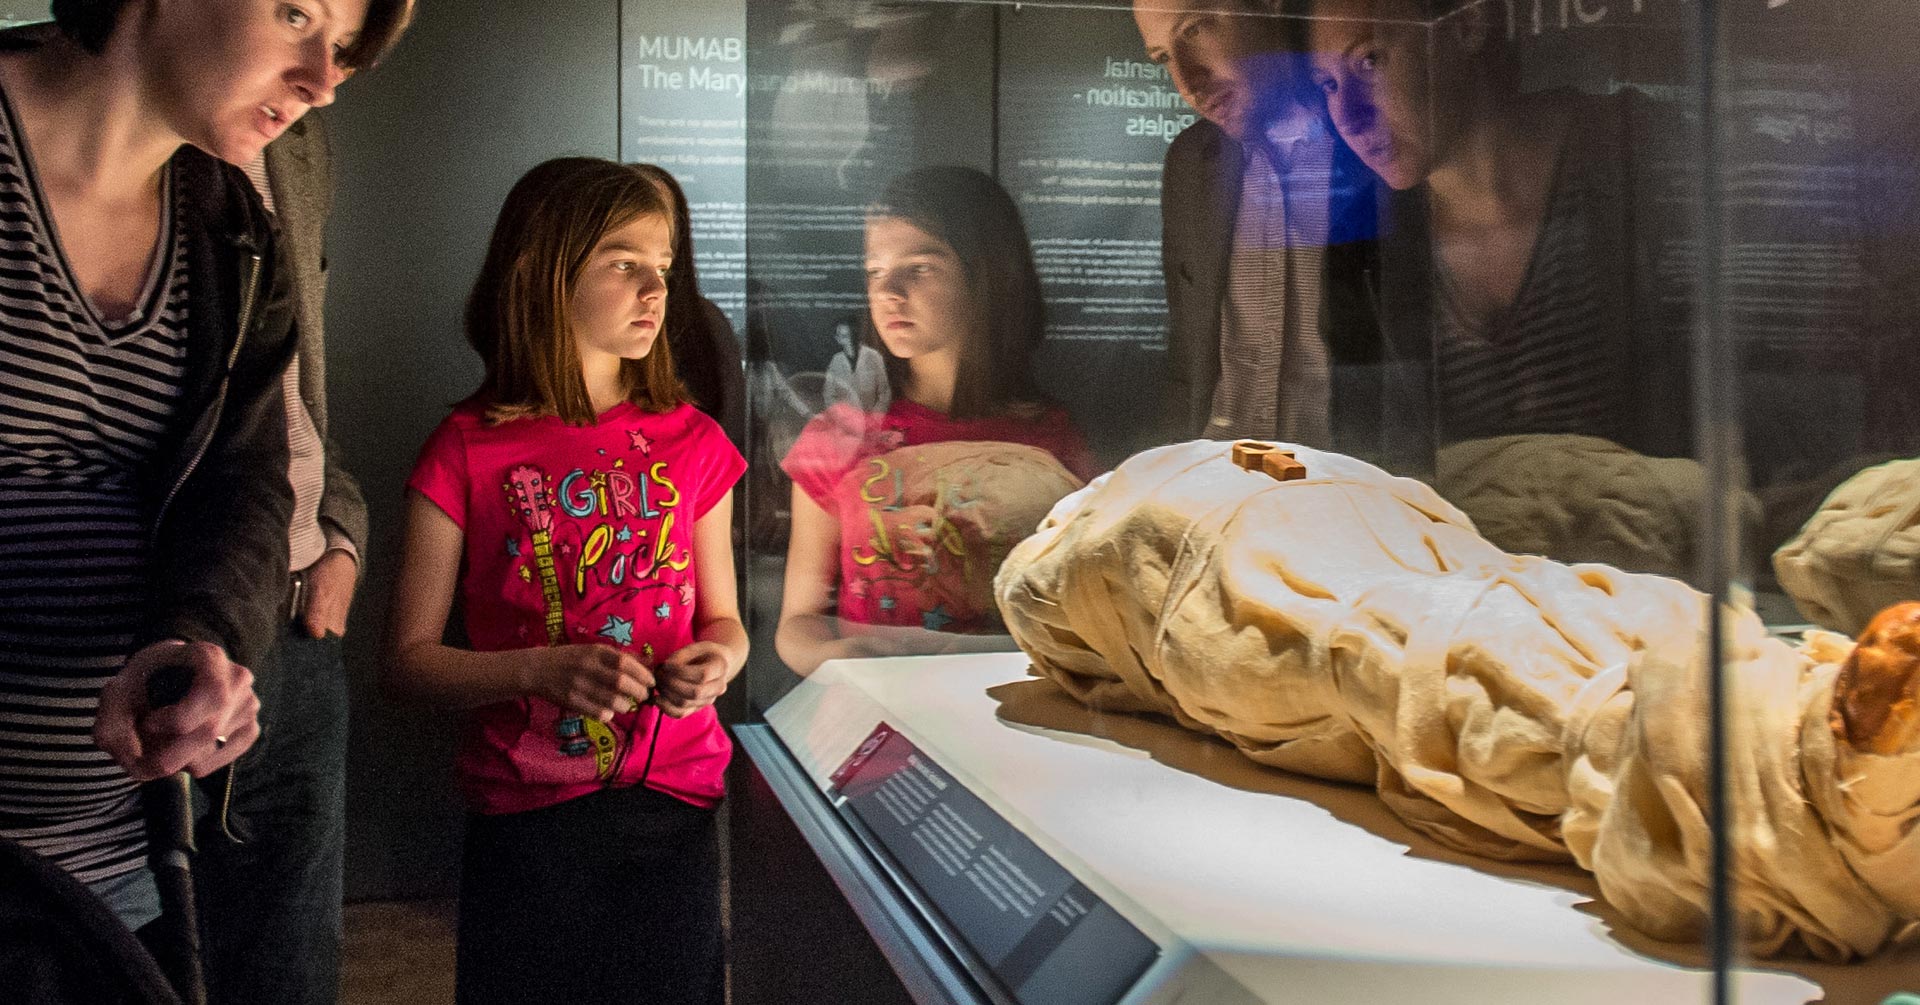 family looks at a mummy on display behind glass